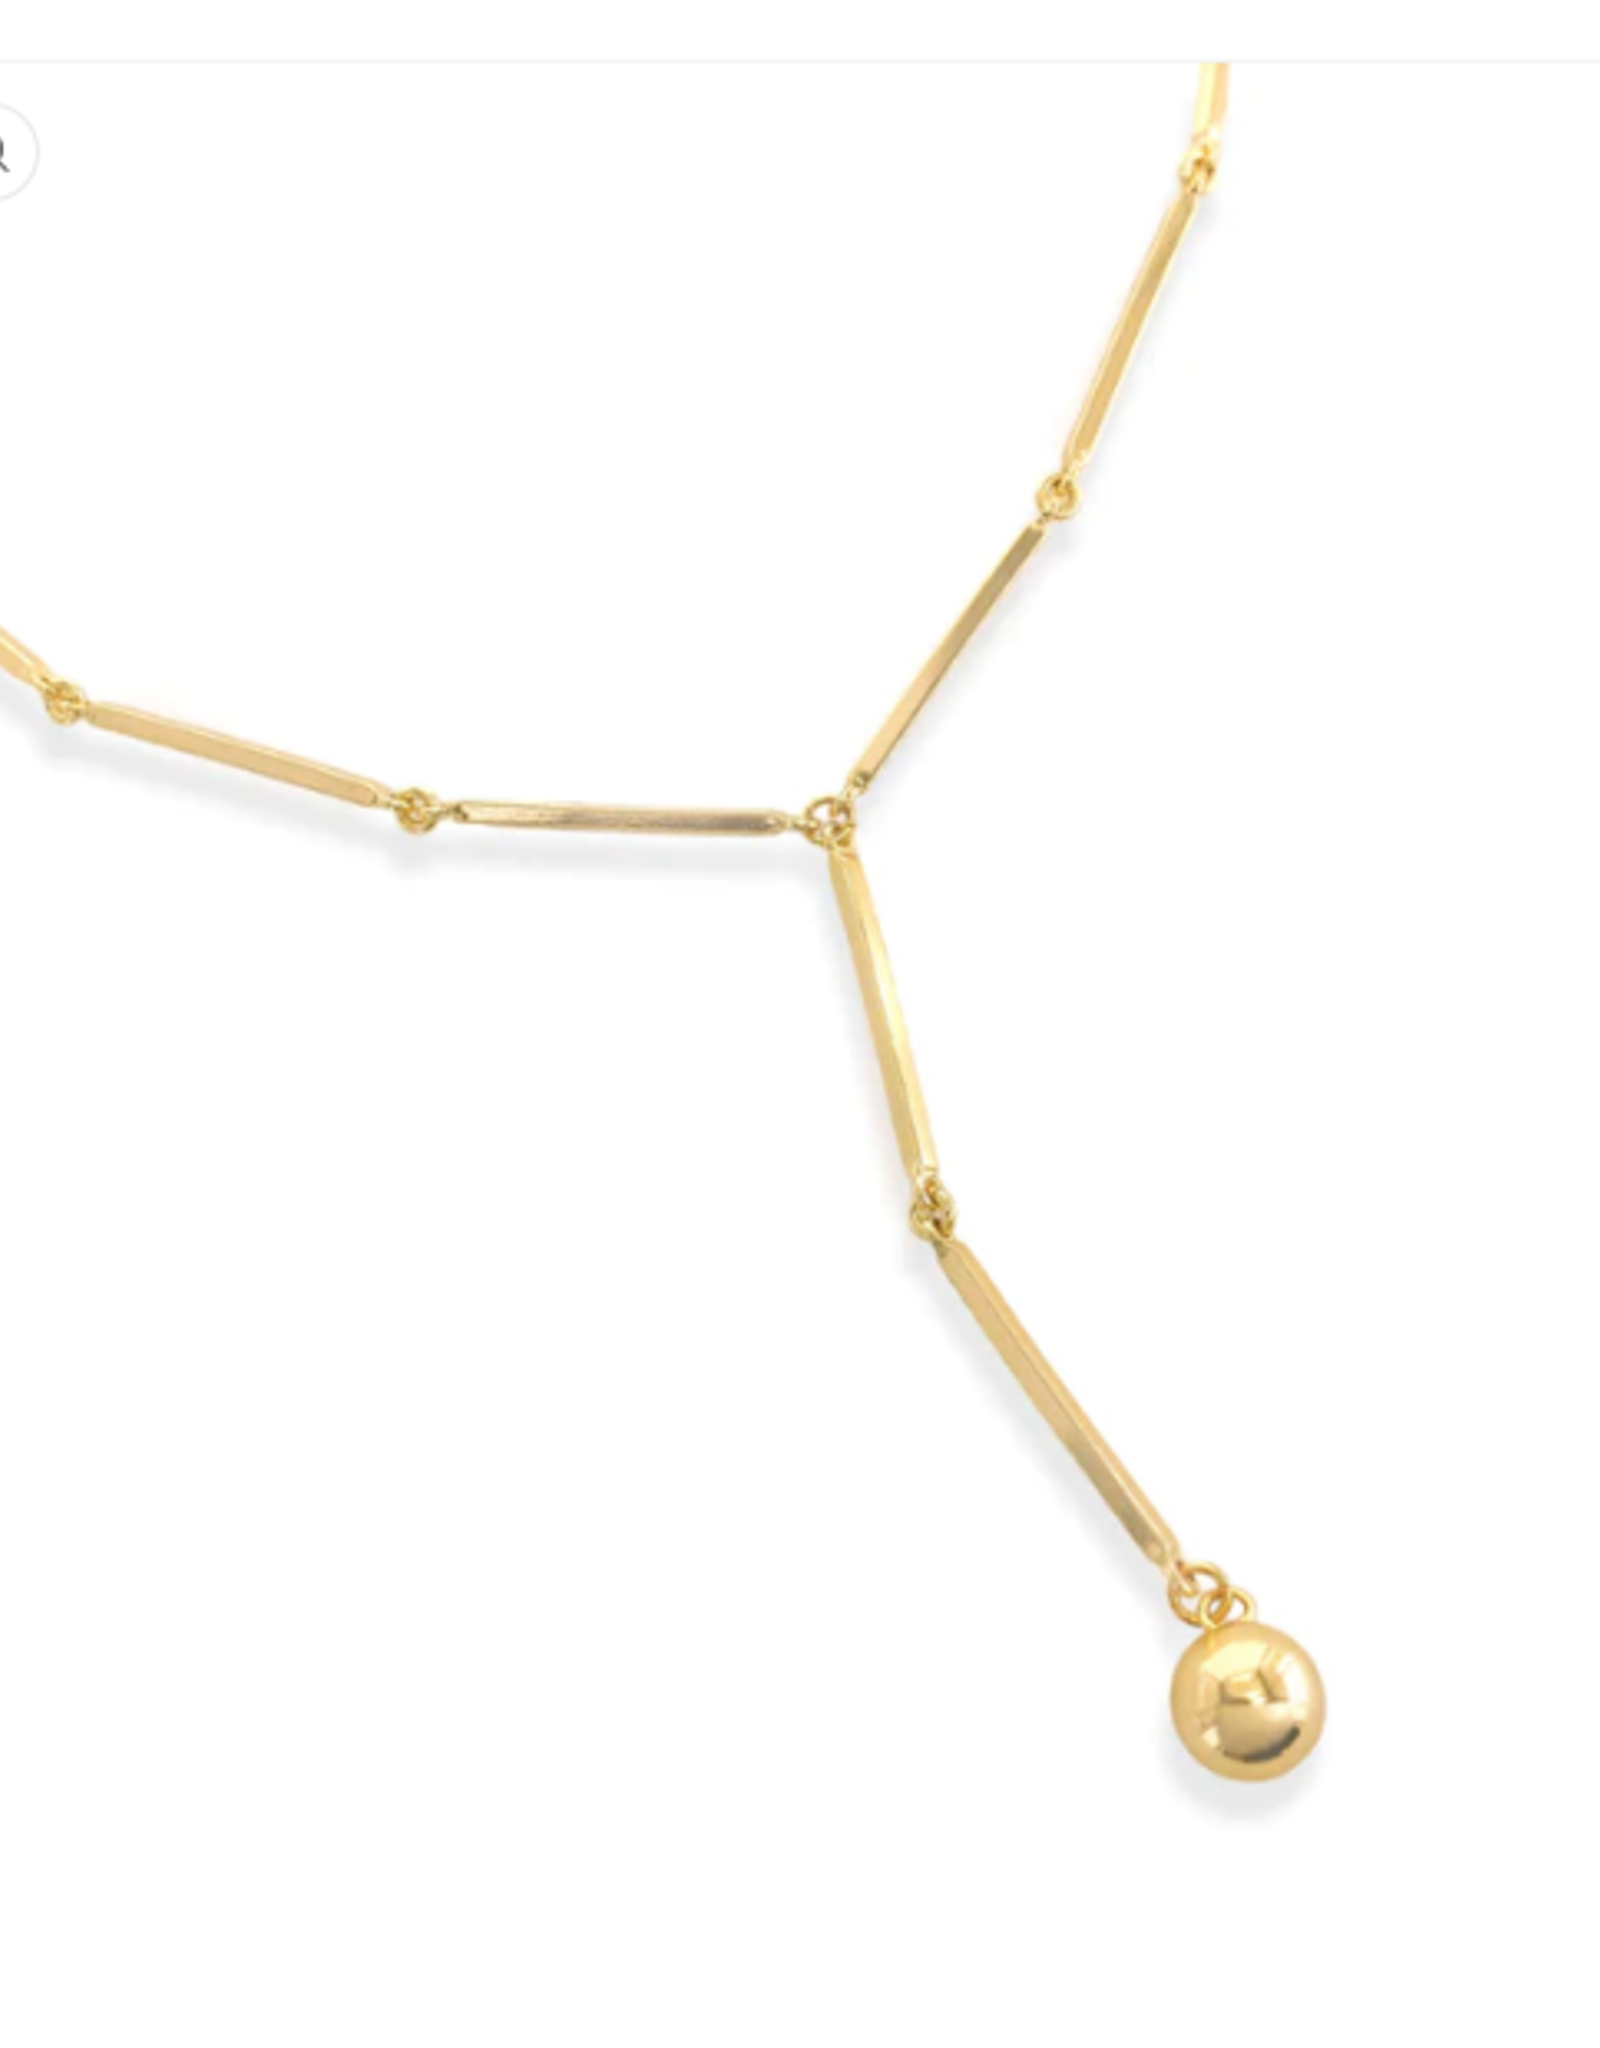 Gold Bar Chain Lariat Necklace